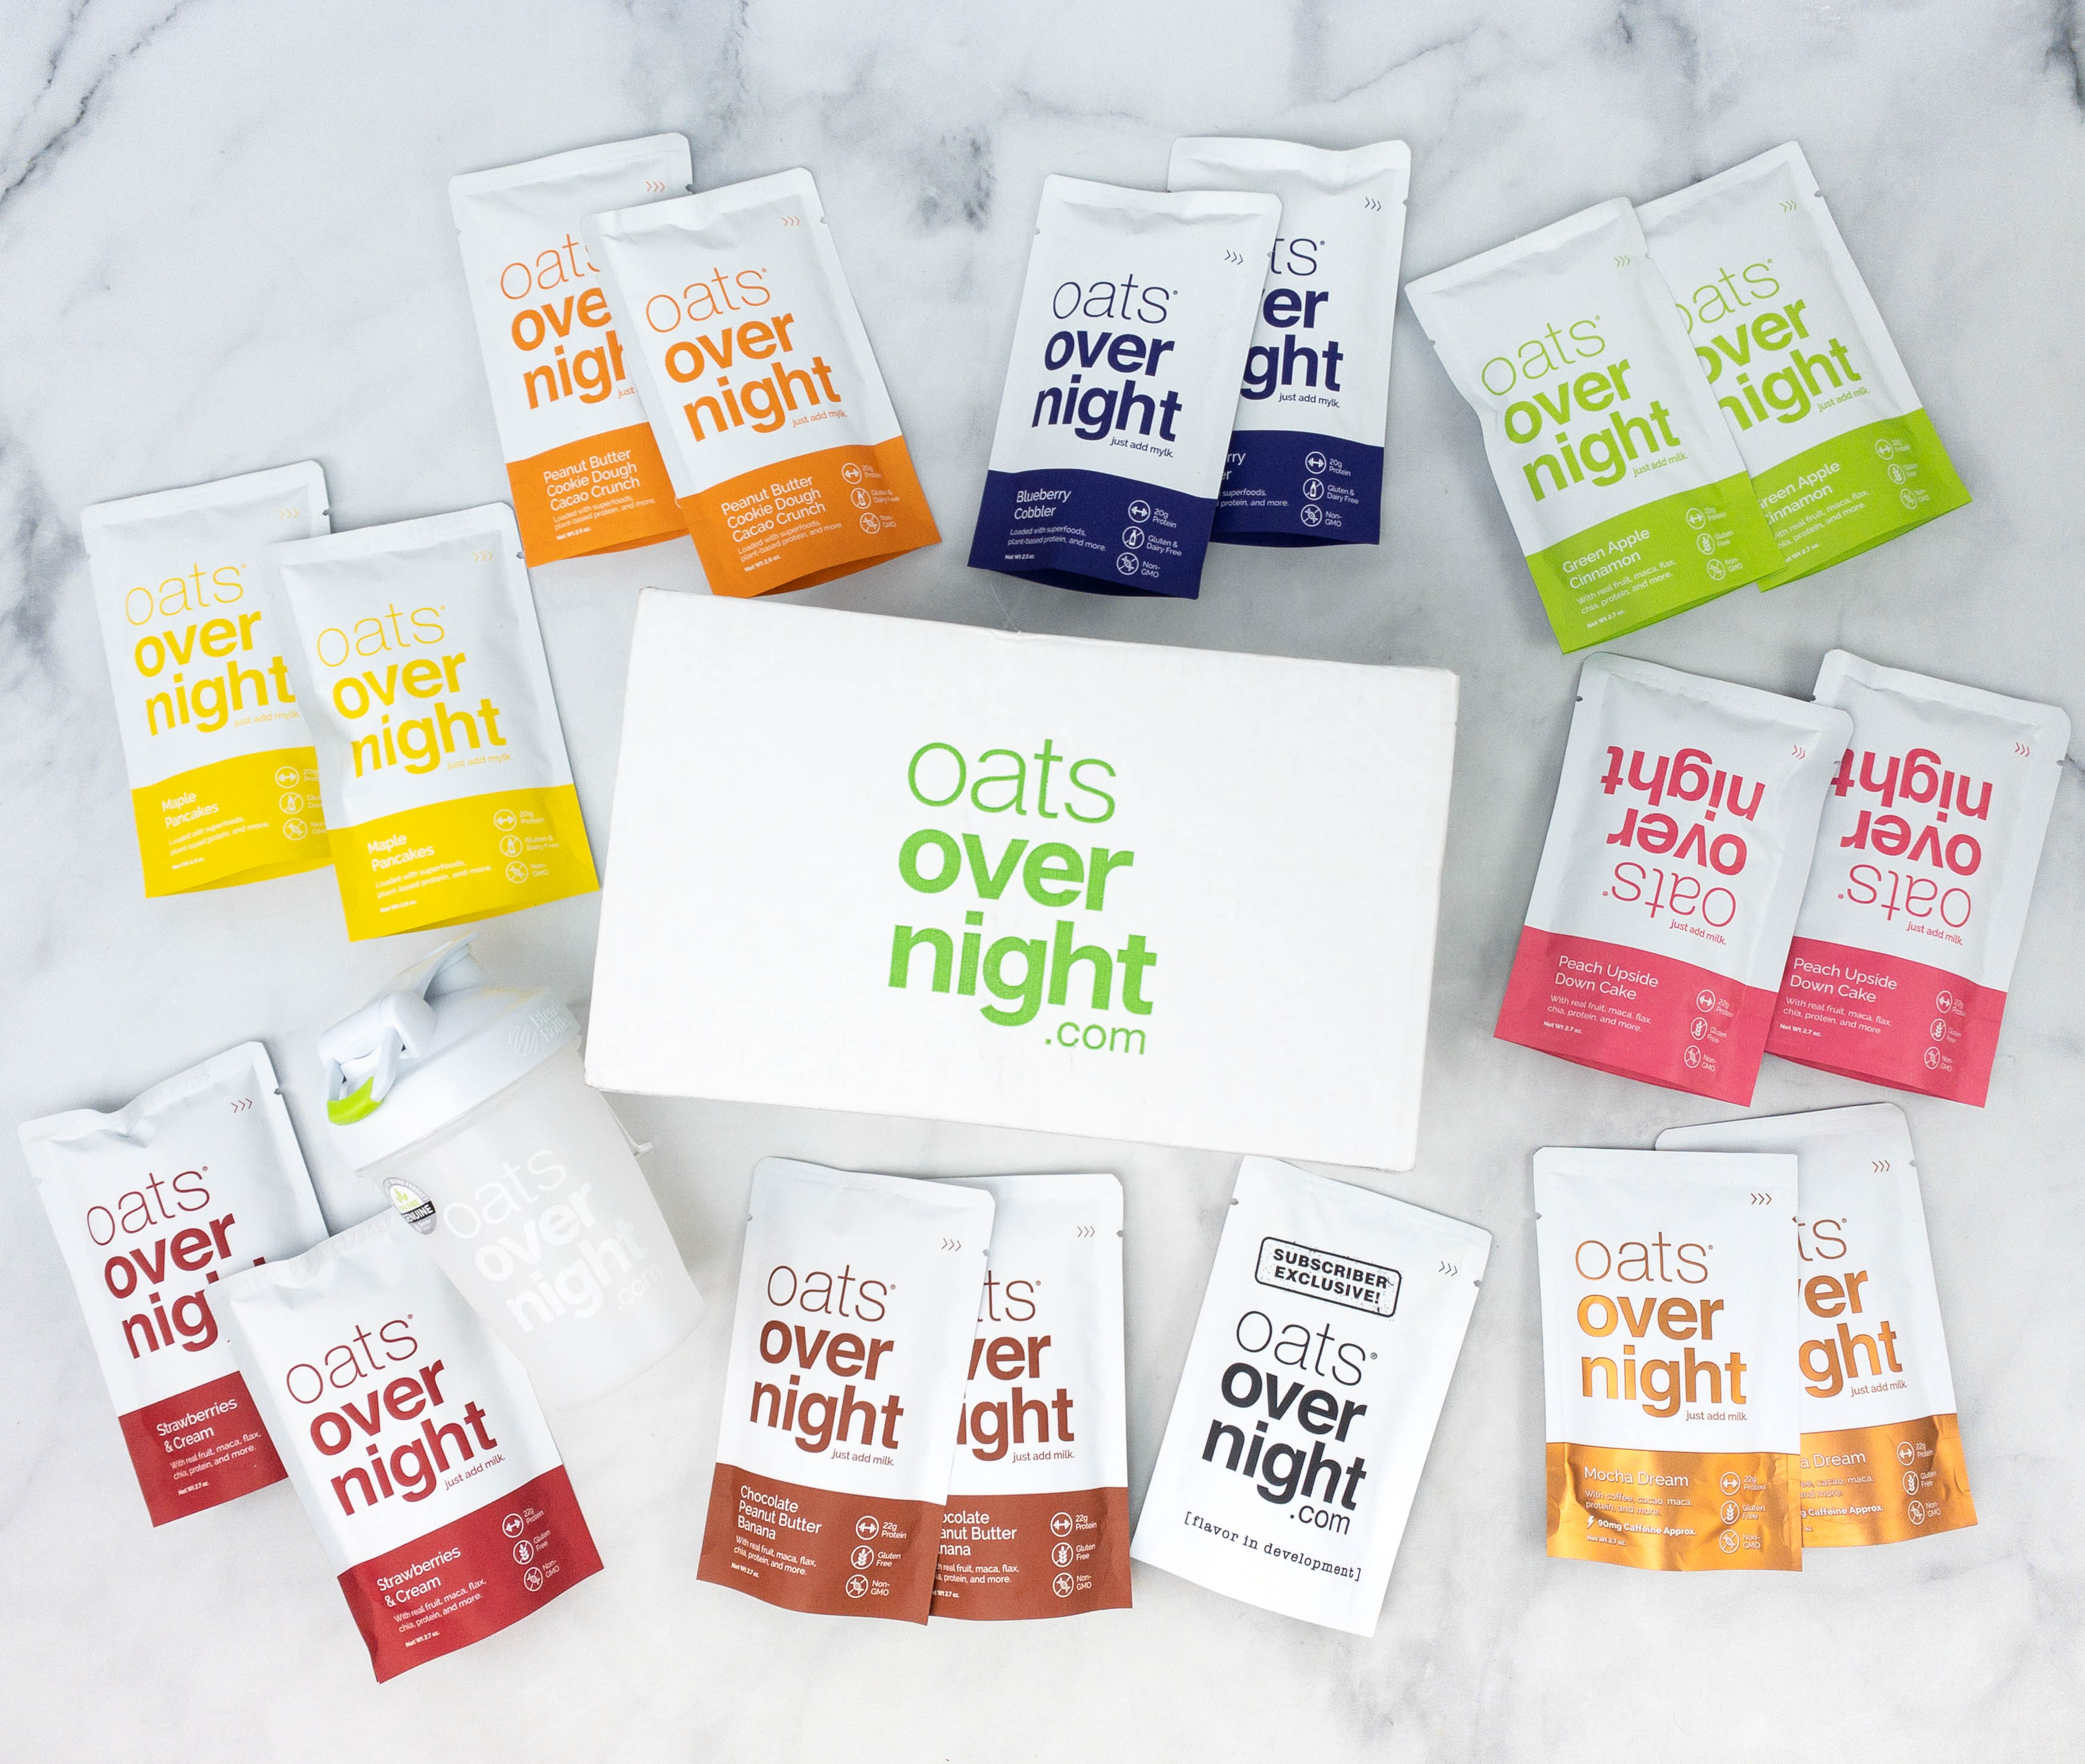 Oats Overnight - Party Pack Variety (8 Meals) High Protein Low Sugar  Breakfast Shake - Gluten Free Non GMO Oatmeal (2.7oz per meal)